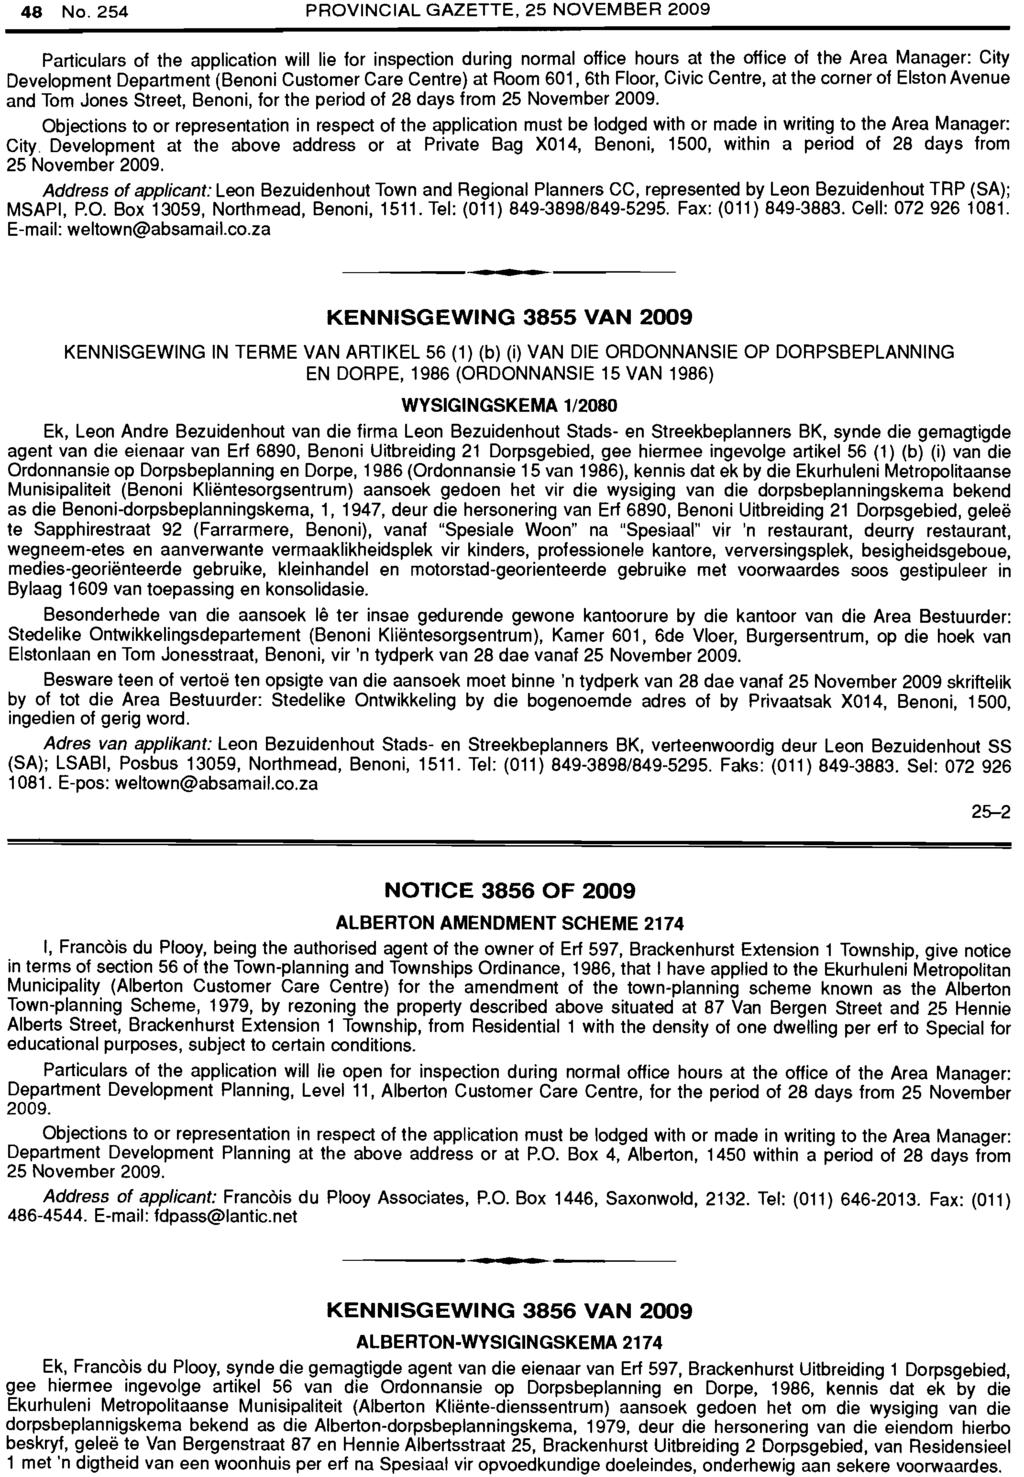 48 No. 254 PROVINCIAL GAZETTE, 25 NOVEMBER 2009 Particulars of the application will lie for inspection during normal office hours.